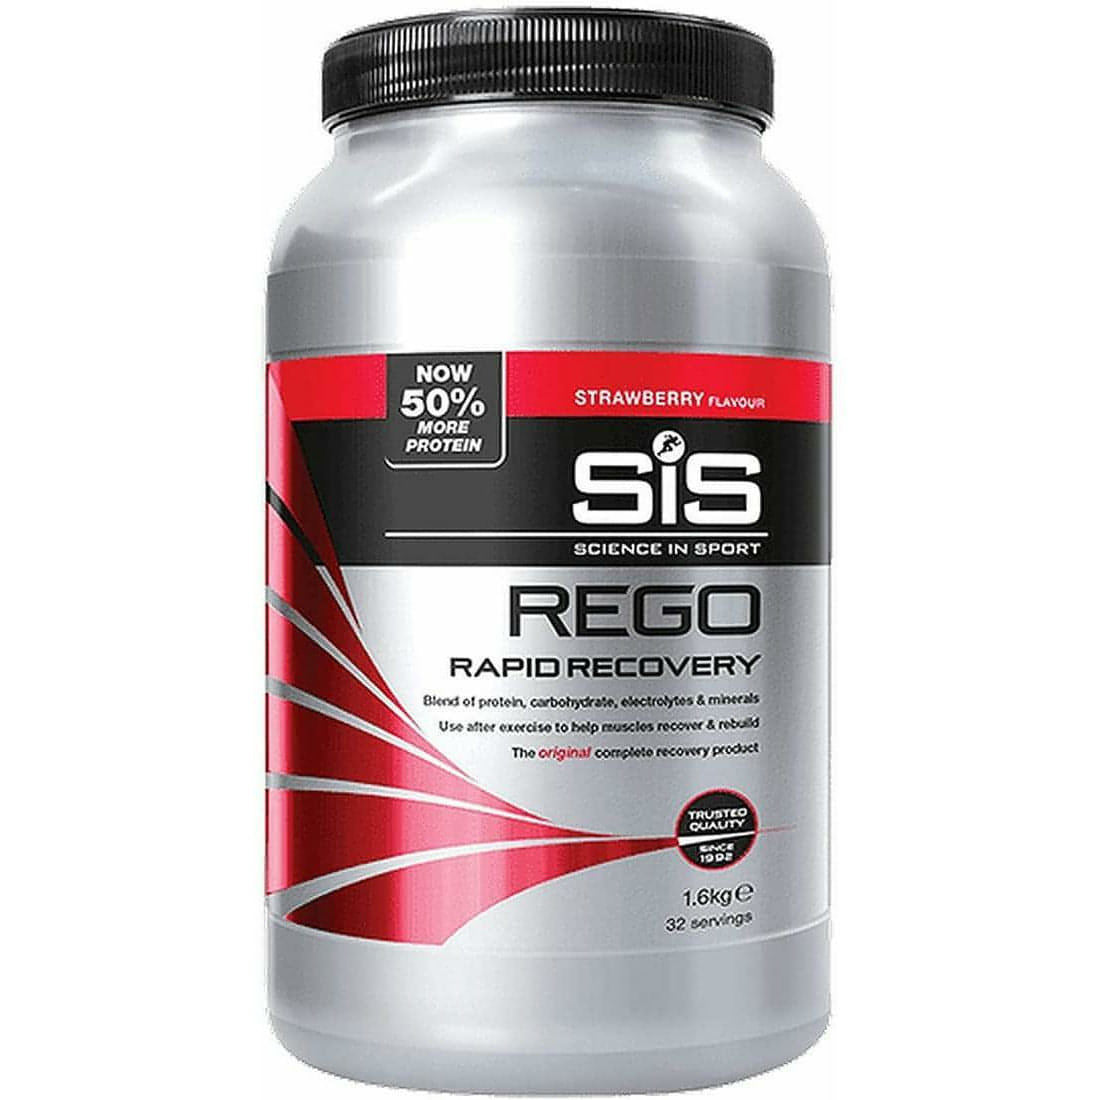 SiS REGO Rapid Recovery Powder - 1.6kg 5025324007066 - Start Fitness